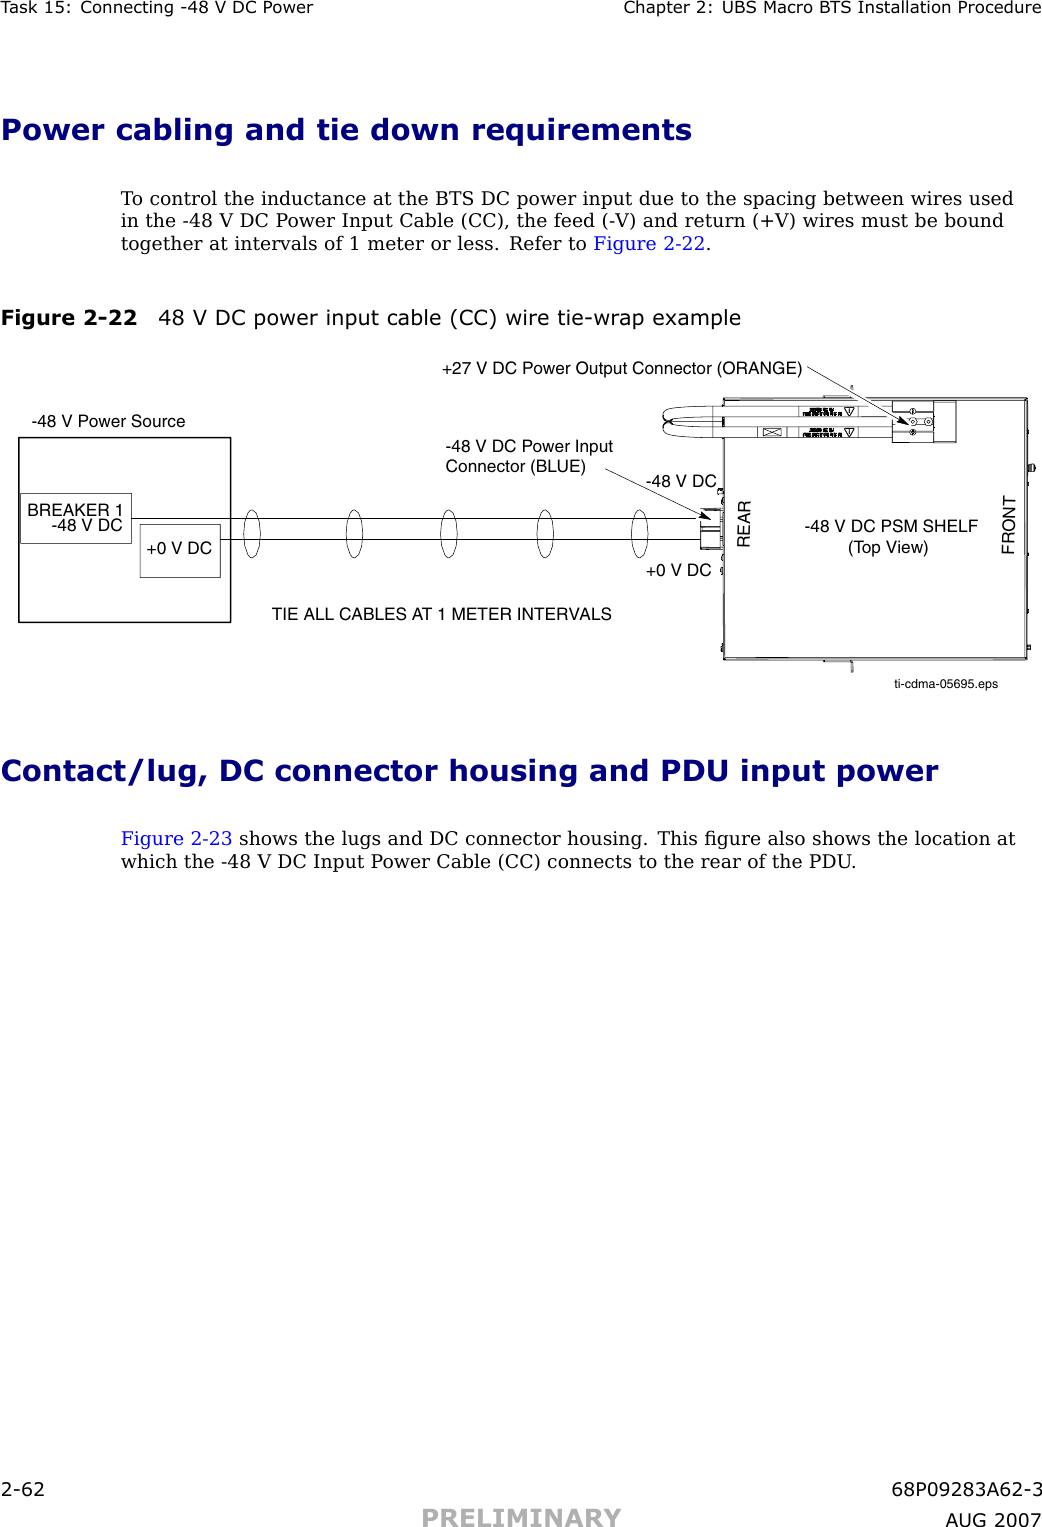 T ask 15: Connecting -48 V DC P ower Chapter 2: UBS Macro B T S Installation ProcedurePower cabling and tie down requirementsT o control the inductance at the BTS DC power input due to the spacing between wires usedin the -48 V DC P ower Input Cable (CC), the feed ( -V) and return (+V) wires must be boundtogether at intervals of 1 meter or less. Refer to Figure 2 -22 .Figure 2 -22 48 V DC power input cable (CC) wire tie -wr ap exampleti-cdma-05695.epsTIE ALL CABLES AT 1 METER INTERVALS-48 V Power SourceBREAKER 1-48 V DC -48 V DC PSM SHELF         (Top View)-48 V DC Power Input Connector (BLUE)+27 V DC Power Output Connector (ORANGE)+0 V DC+0 V DCREARFRONT-48 V DCContact/lug, DC connector housing and PDU input powerFigure 2 -23 shows the lugs and DC connector housing. This ﬁgure also shows the location atwhich the -48 V DC Input P ower Cable (CC) connects to the rear of the PDU .2 -62 68P09283A62 -3PRELIMINARY A UG 2007